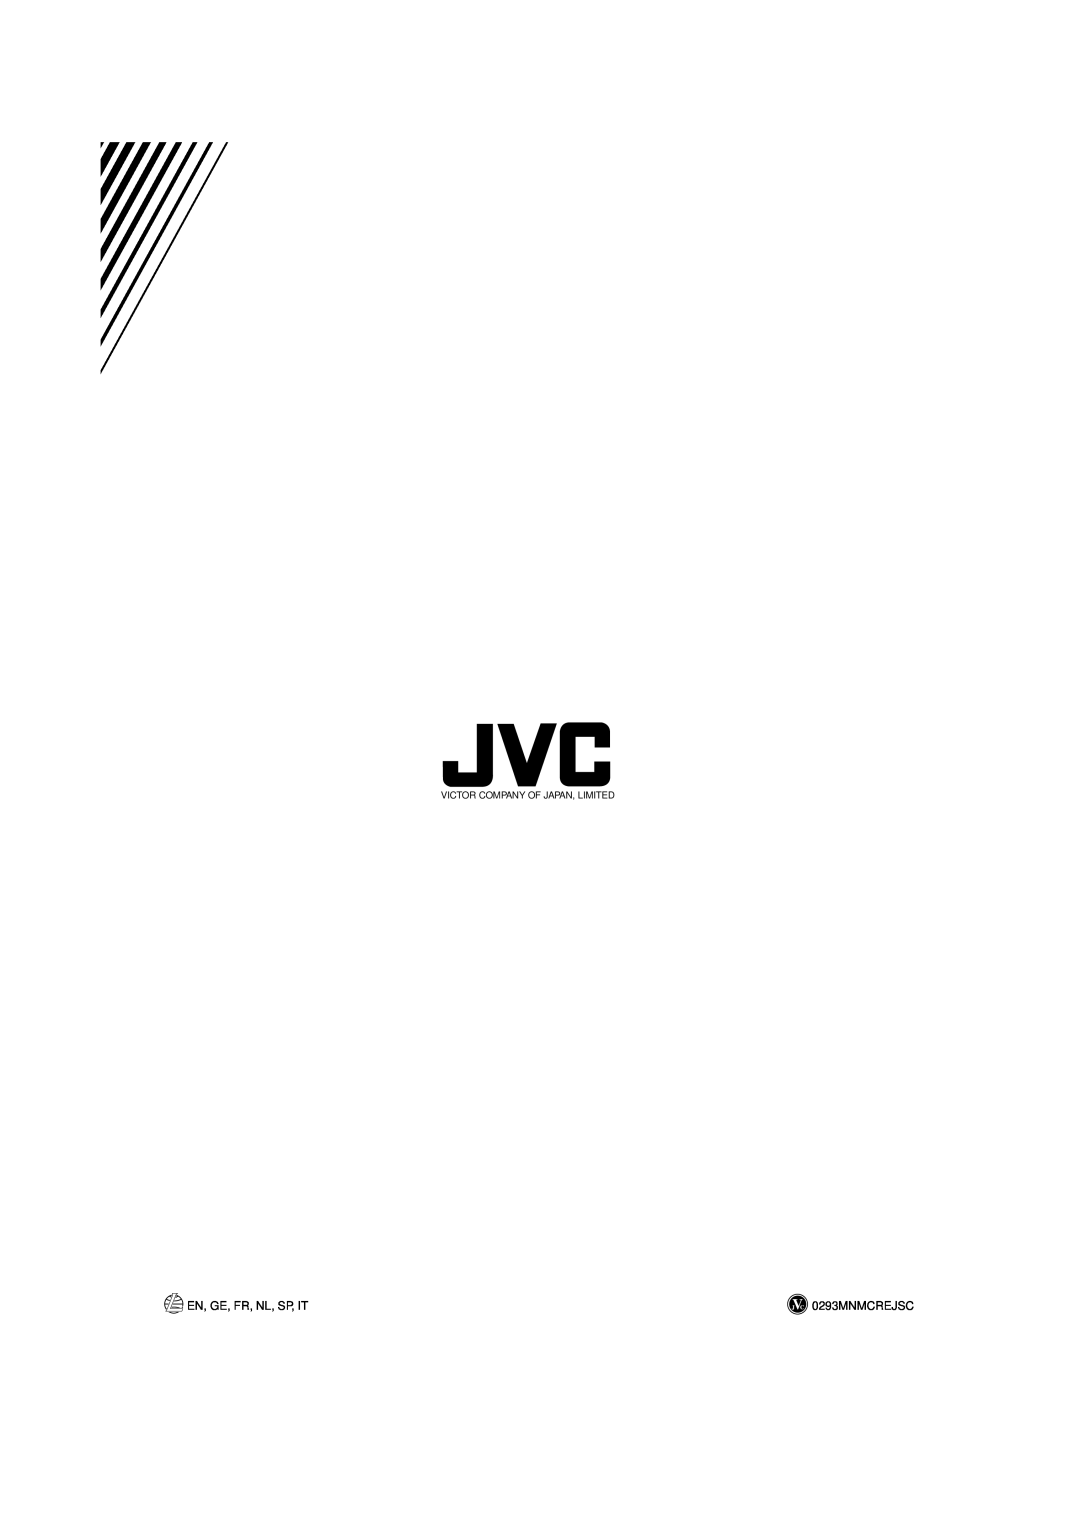 JVC UX-T300R, LVT0027-005A manual En, Ge, Fr, Nl, Sp, It, 0293MNMCREJSC, Victor Company Of Japan, Limited 